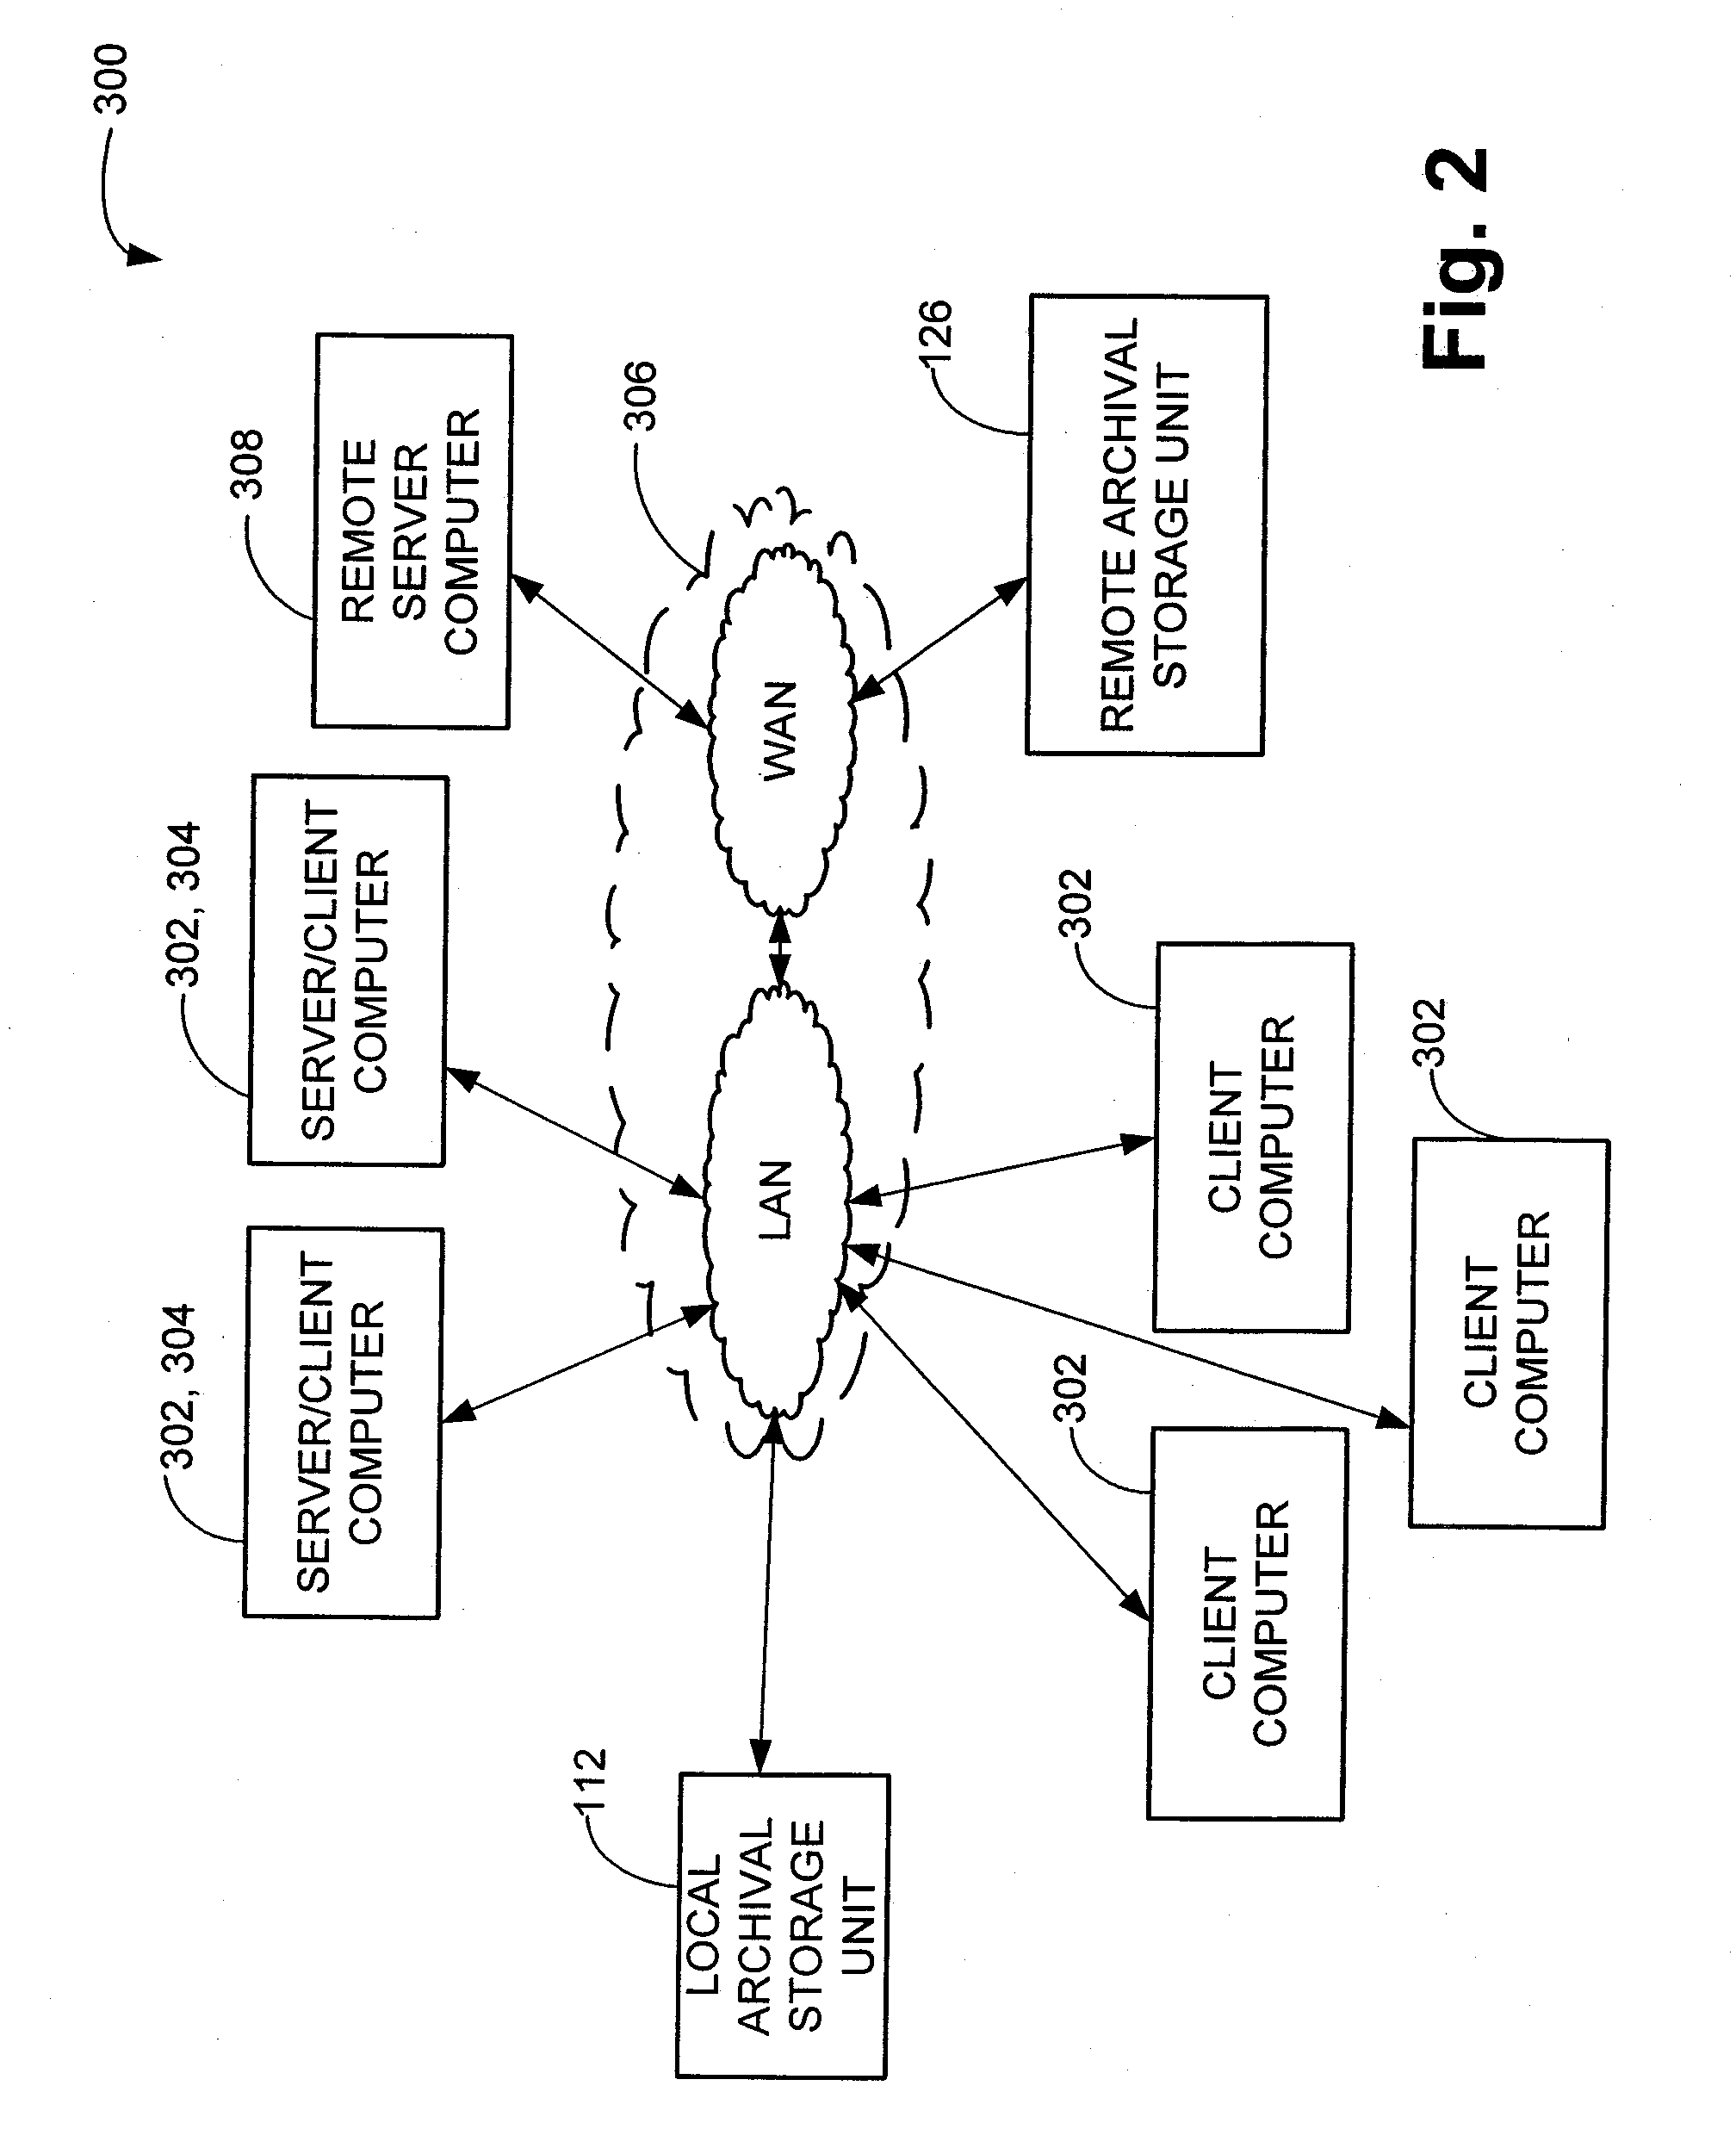 Remote disaster data recovery system and method